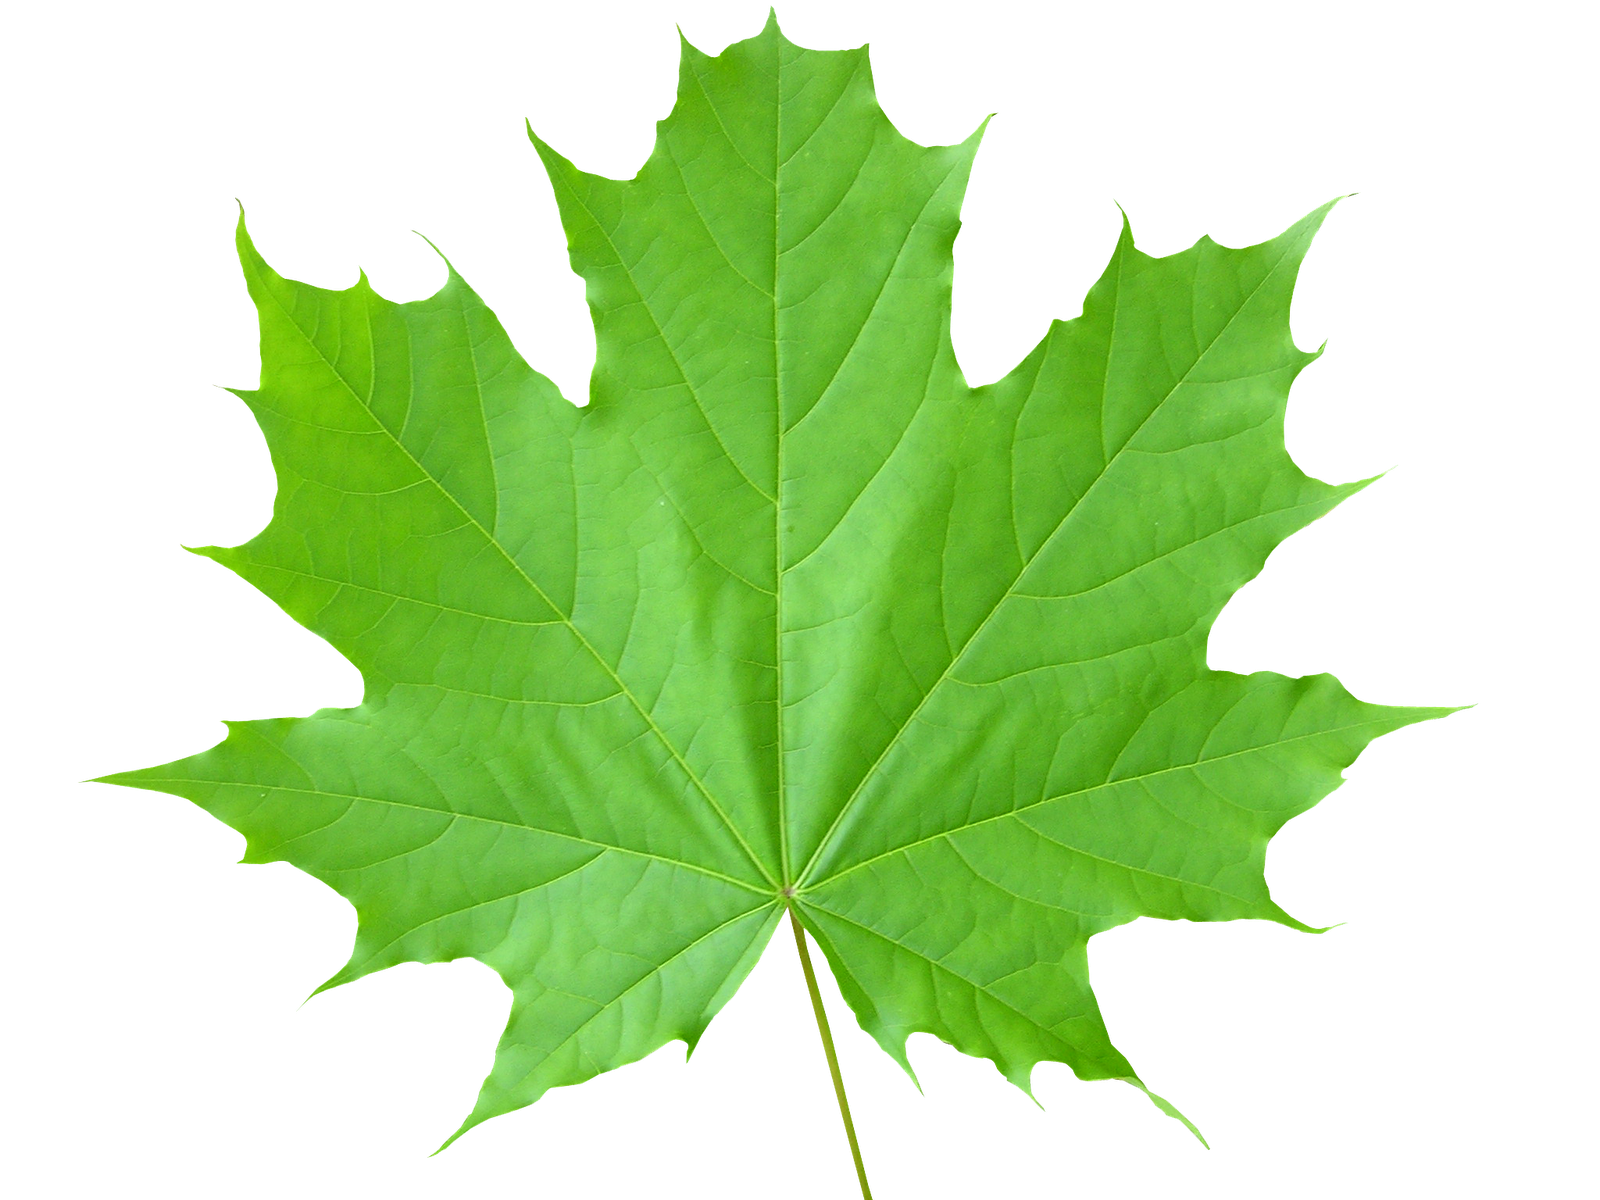 Maple Leaf - Wallpaper, High Definition, High Quality, Widescreen